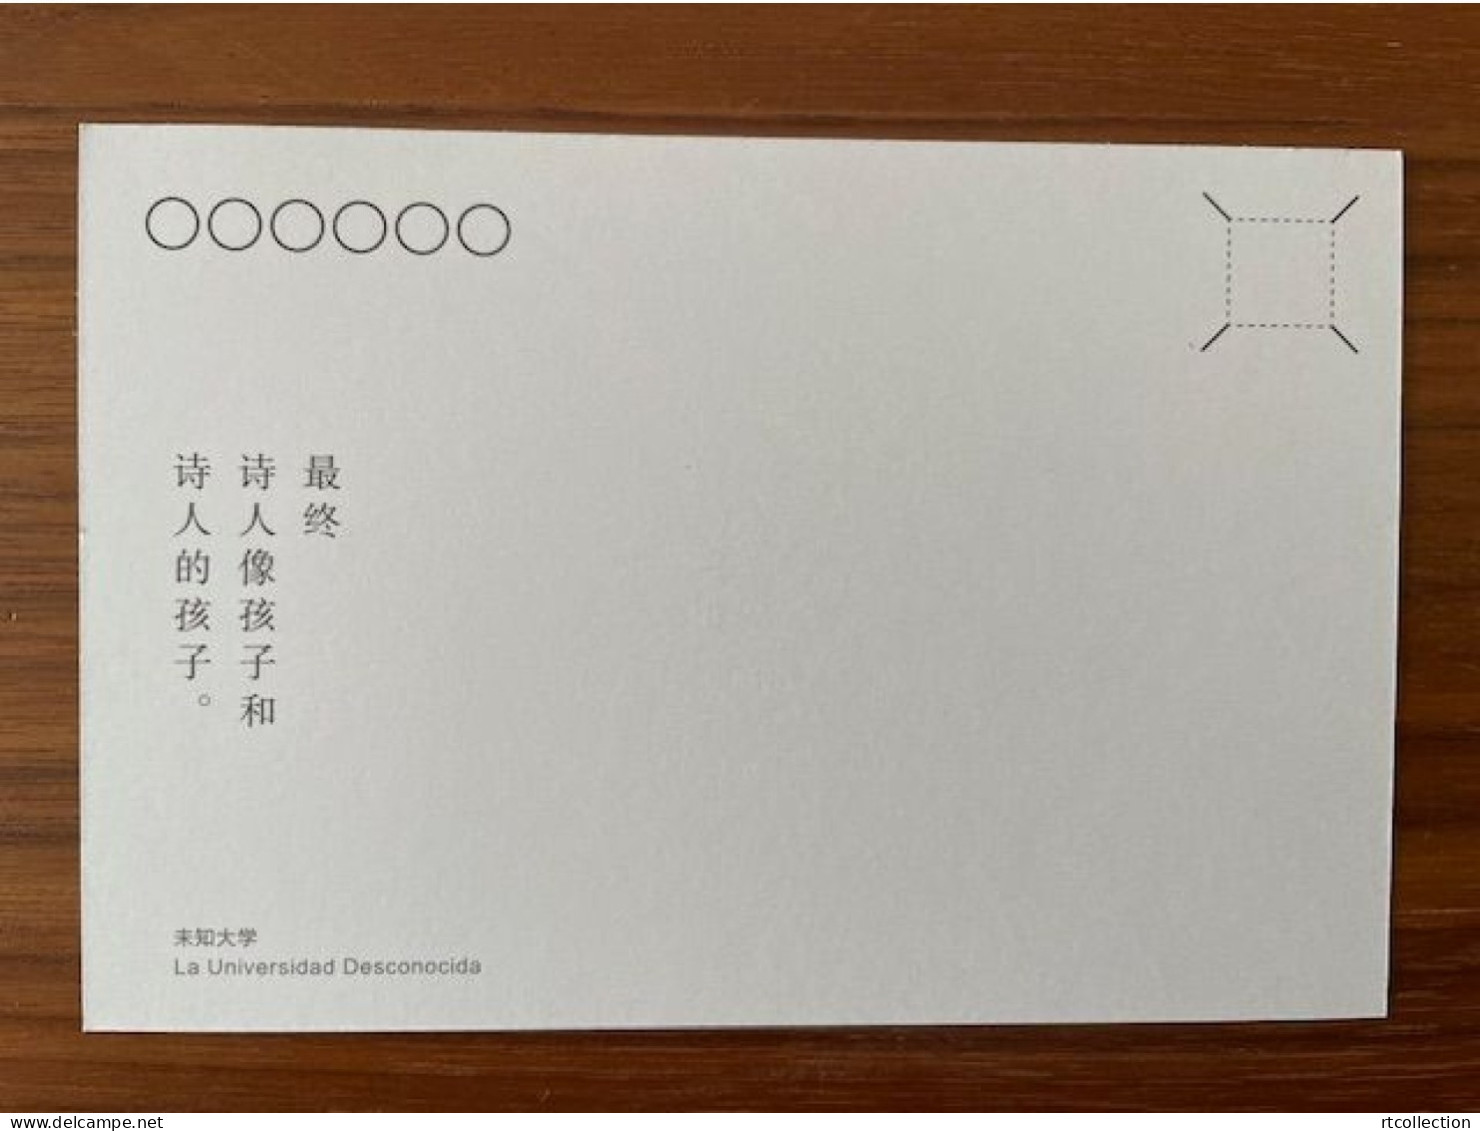 China Postal Card Postcard Art Advertising Post Card Roberto Bolano ﻿Poem Poet Hand Hands People Writer Writers - Ecrivains